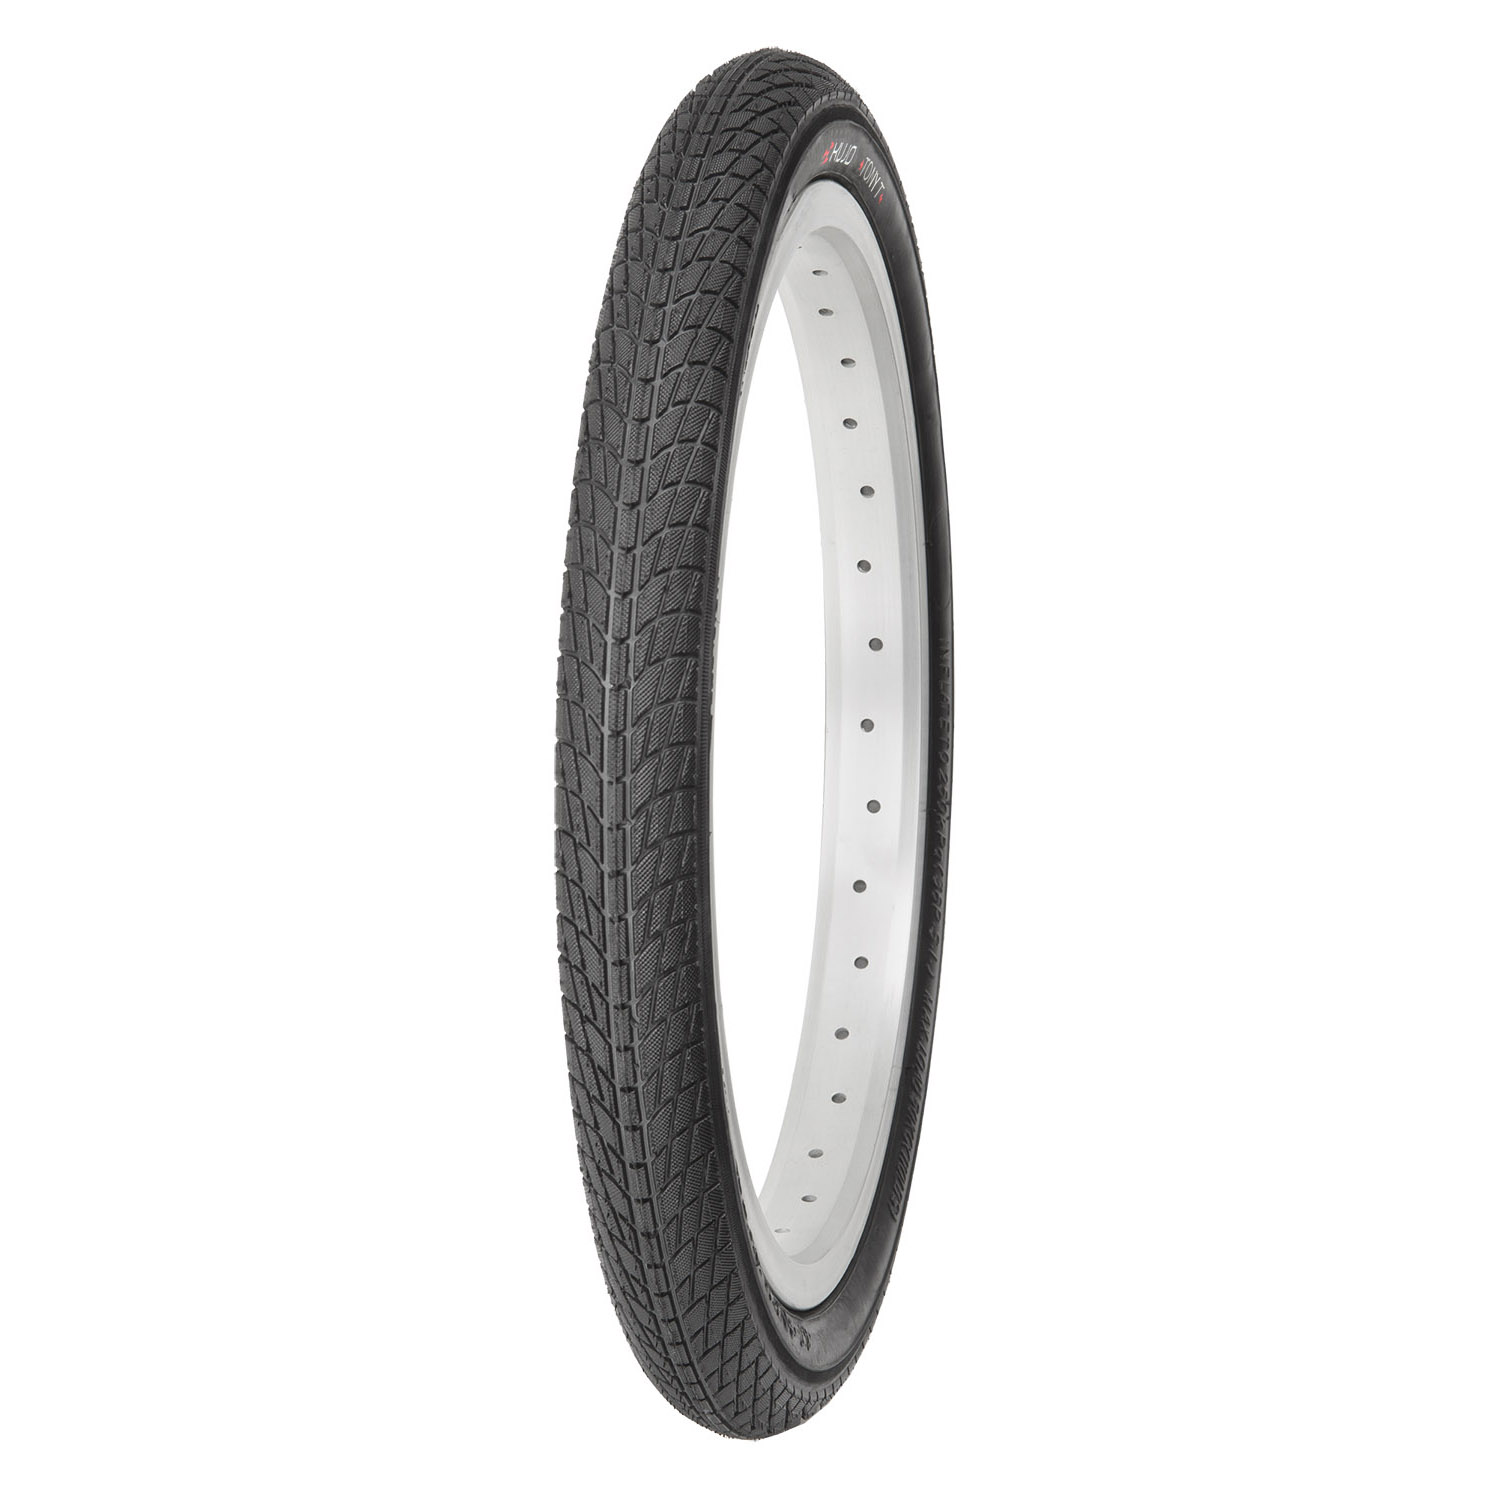 558032 – KUJO Tony T Clincher 18 x 1.75″ – AVAILABLE IN SELECTED BIKE SHOPS